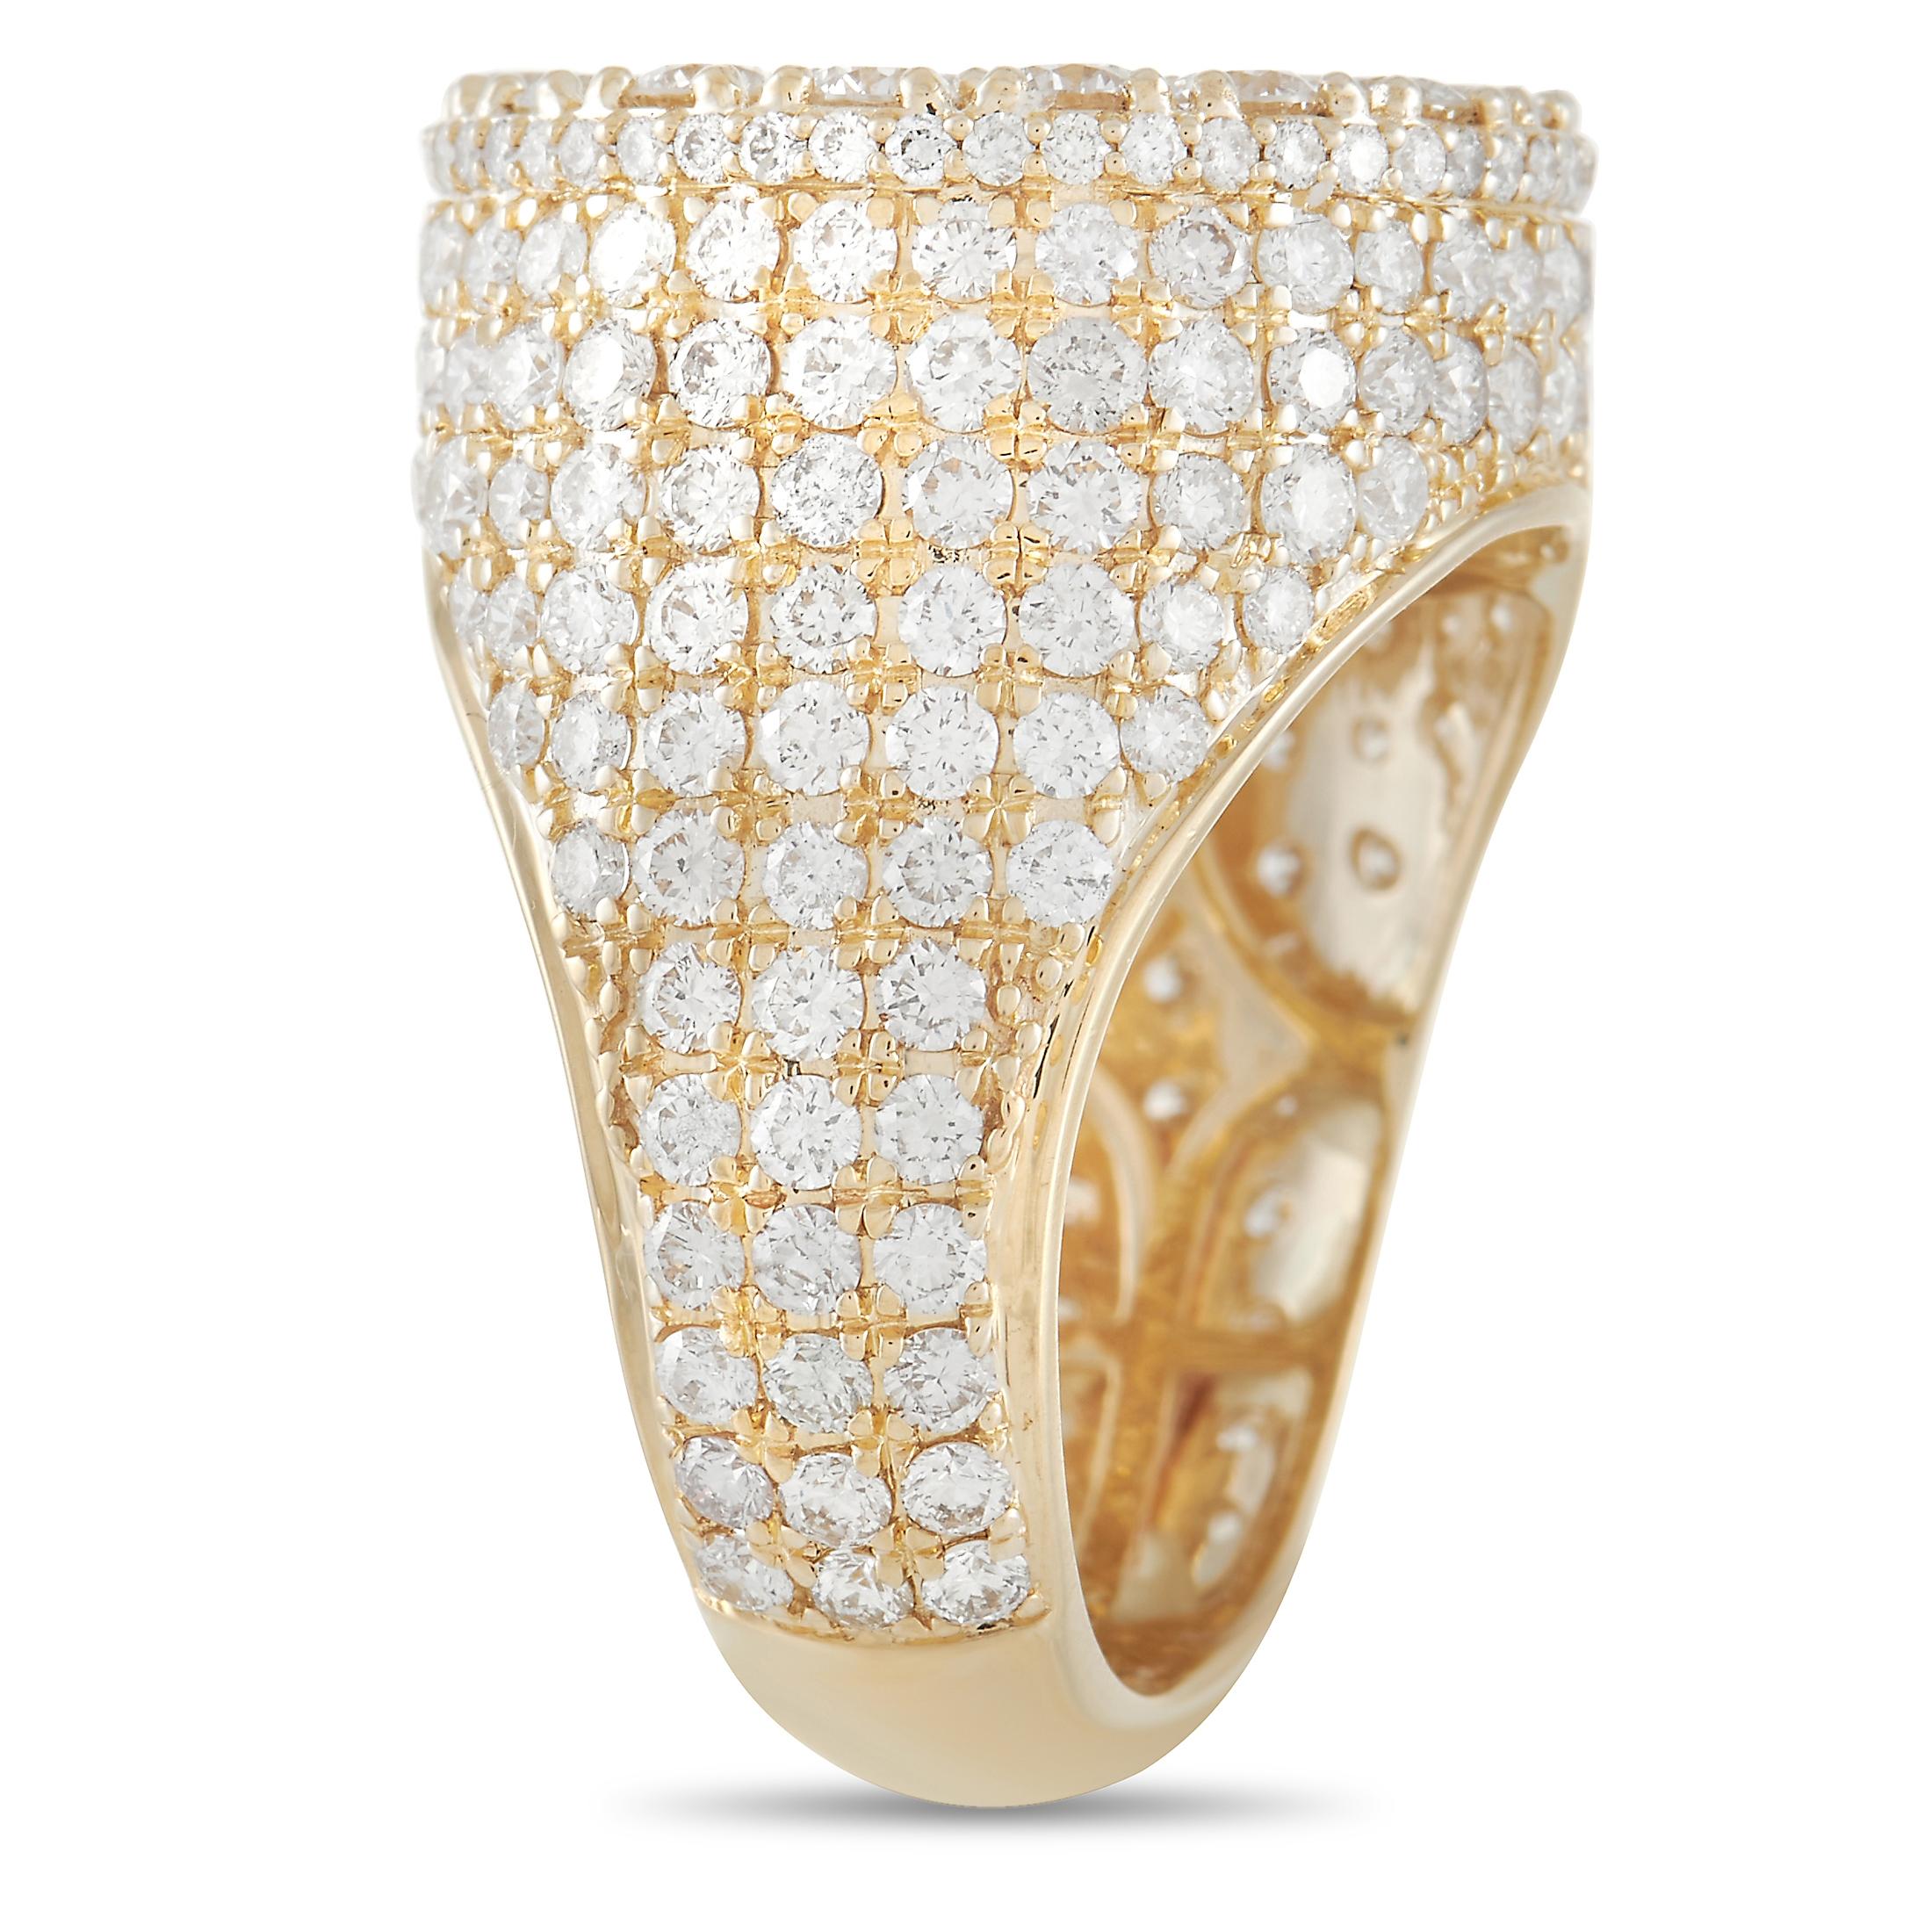 An impressive array of diamonds totaling 7.25 carats make this bold ring impossible to ignore. Featuring a lustrous 14K Yellow Gold setting, the 5mm wide band and round, flat top make it an incredibly luxurious that will always make a statement. The